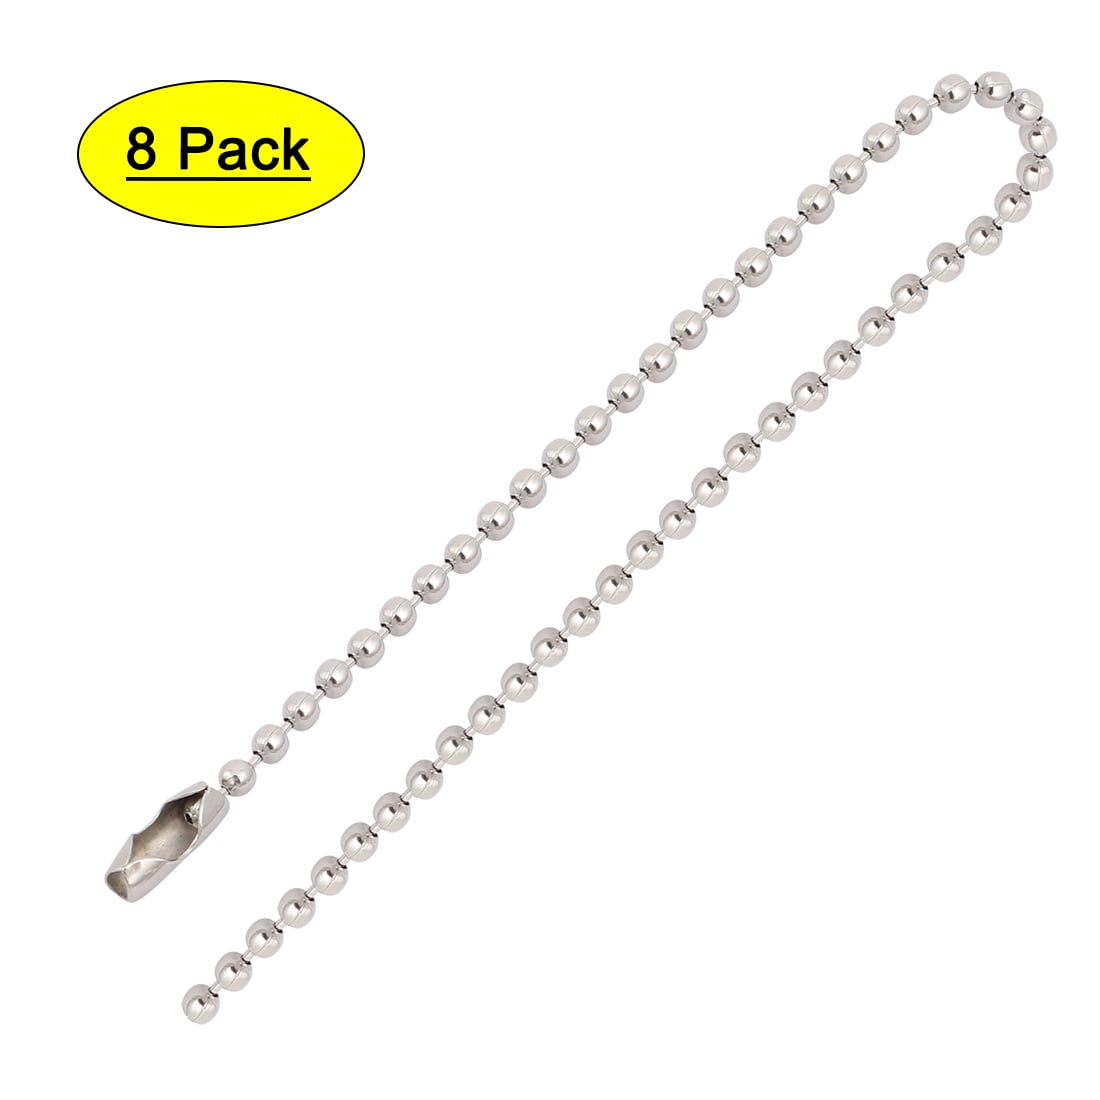 10Pcs Metal Plated Iron Clasp Ball Chain Keychain White 2.4mm Dia 15cm Length 